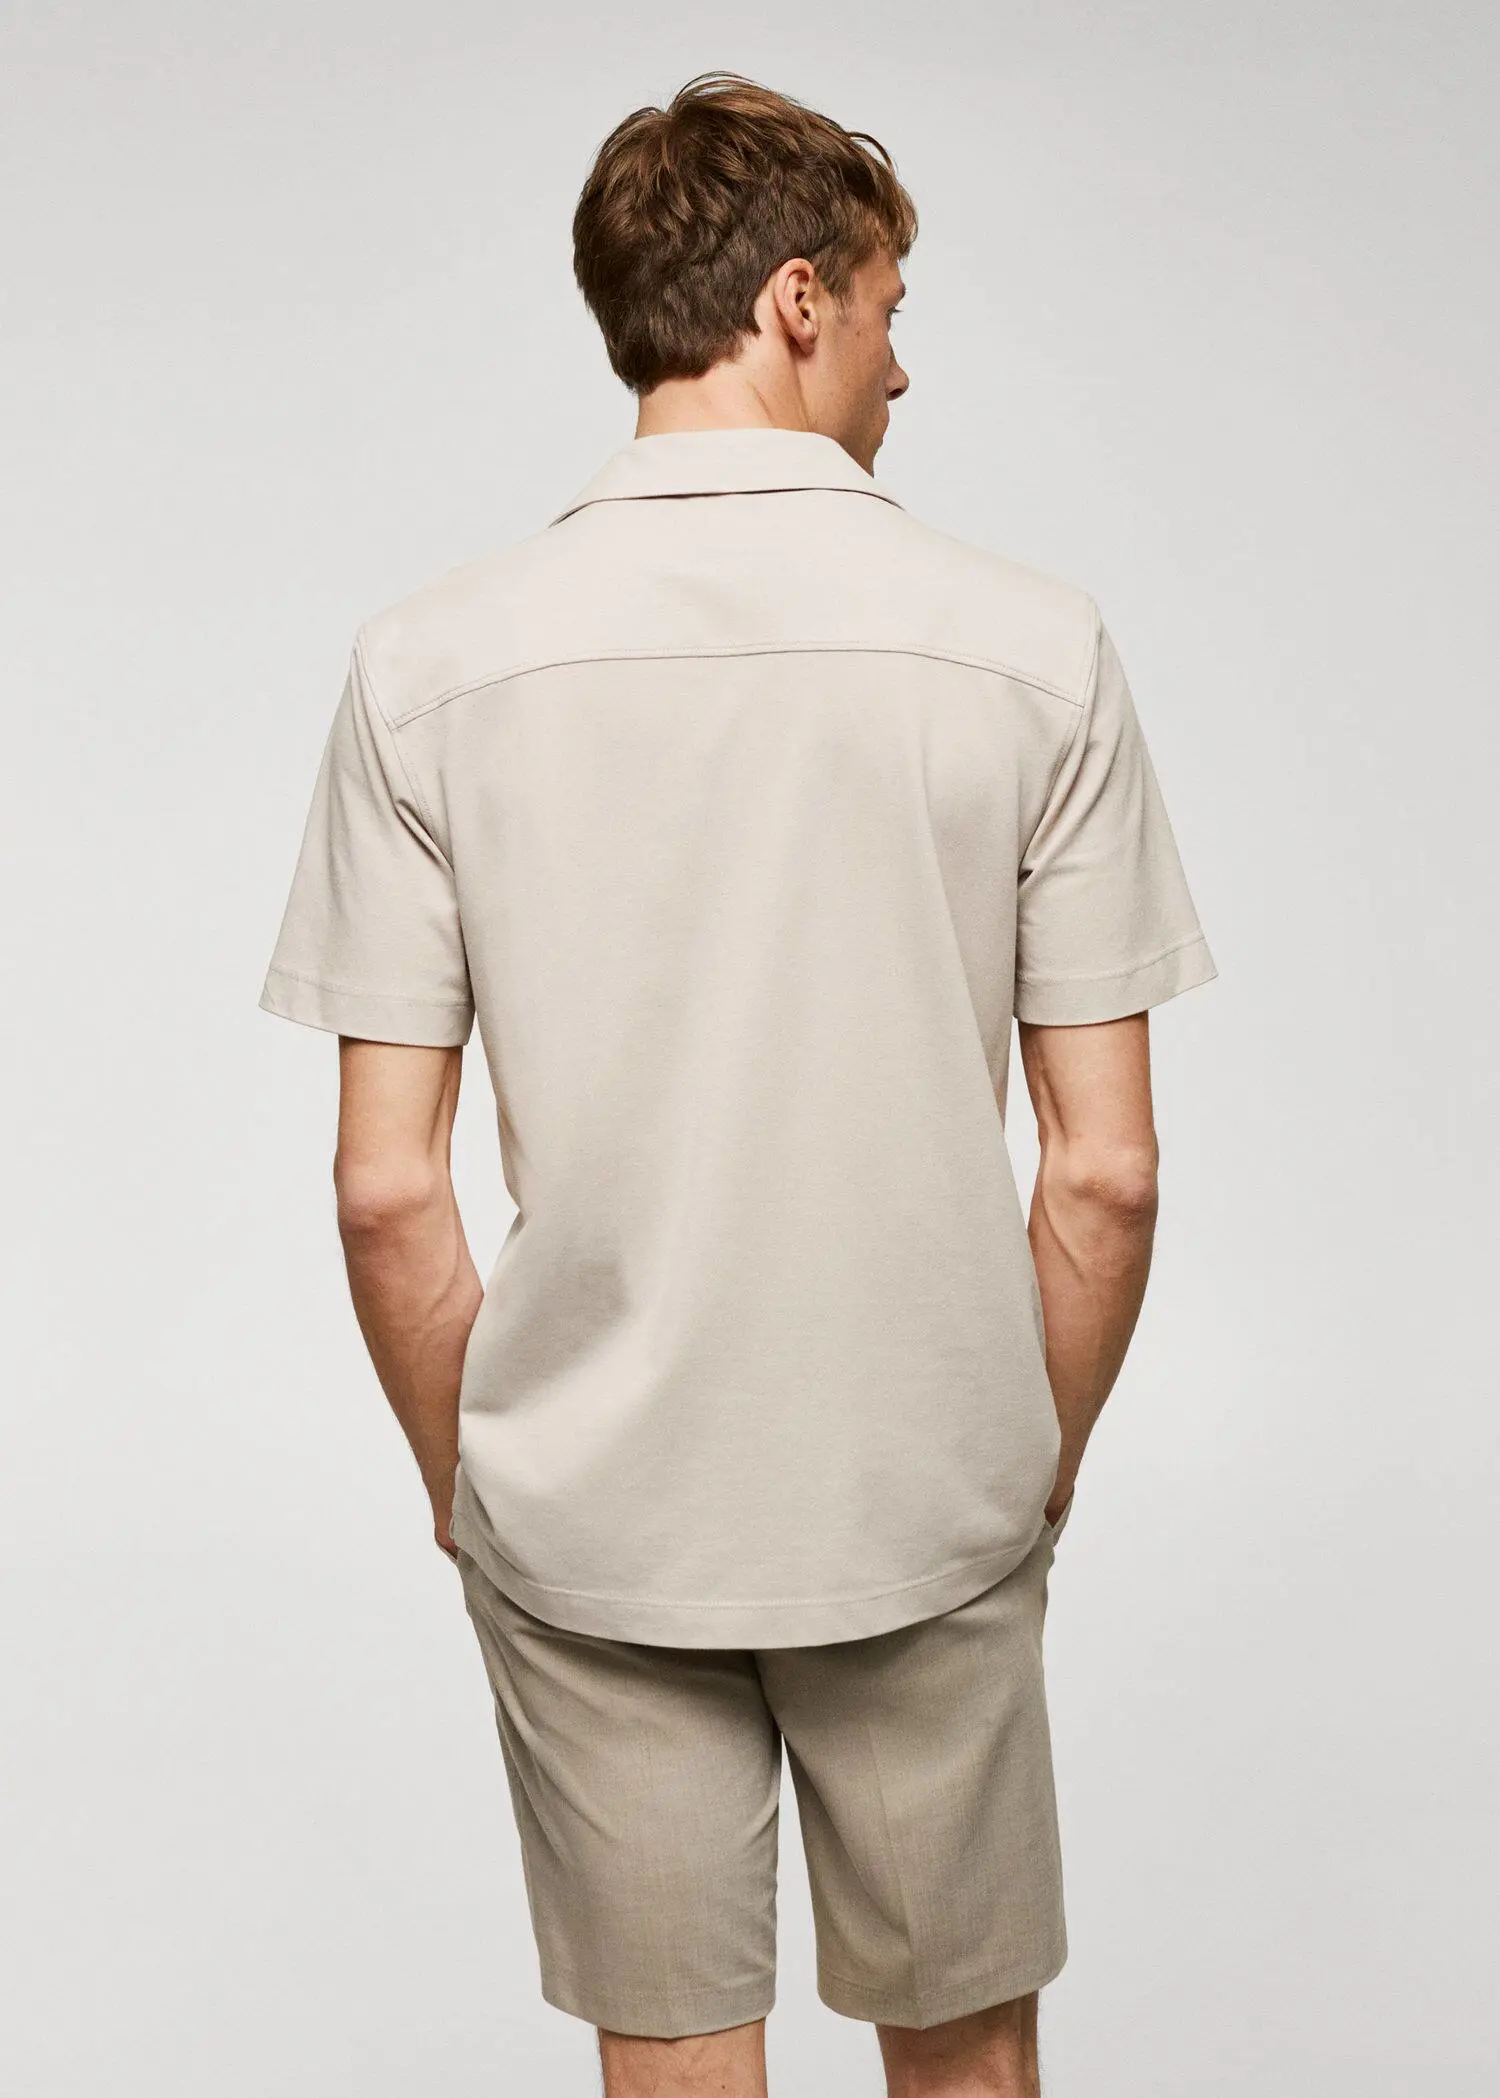 Mango Bowling-collar pique shirt. a man in a tan shirt is standing with his hands in his pockets. 